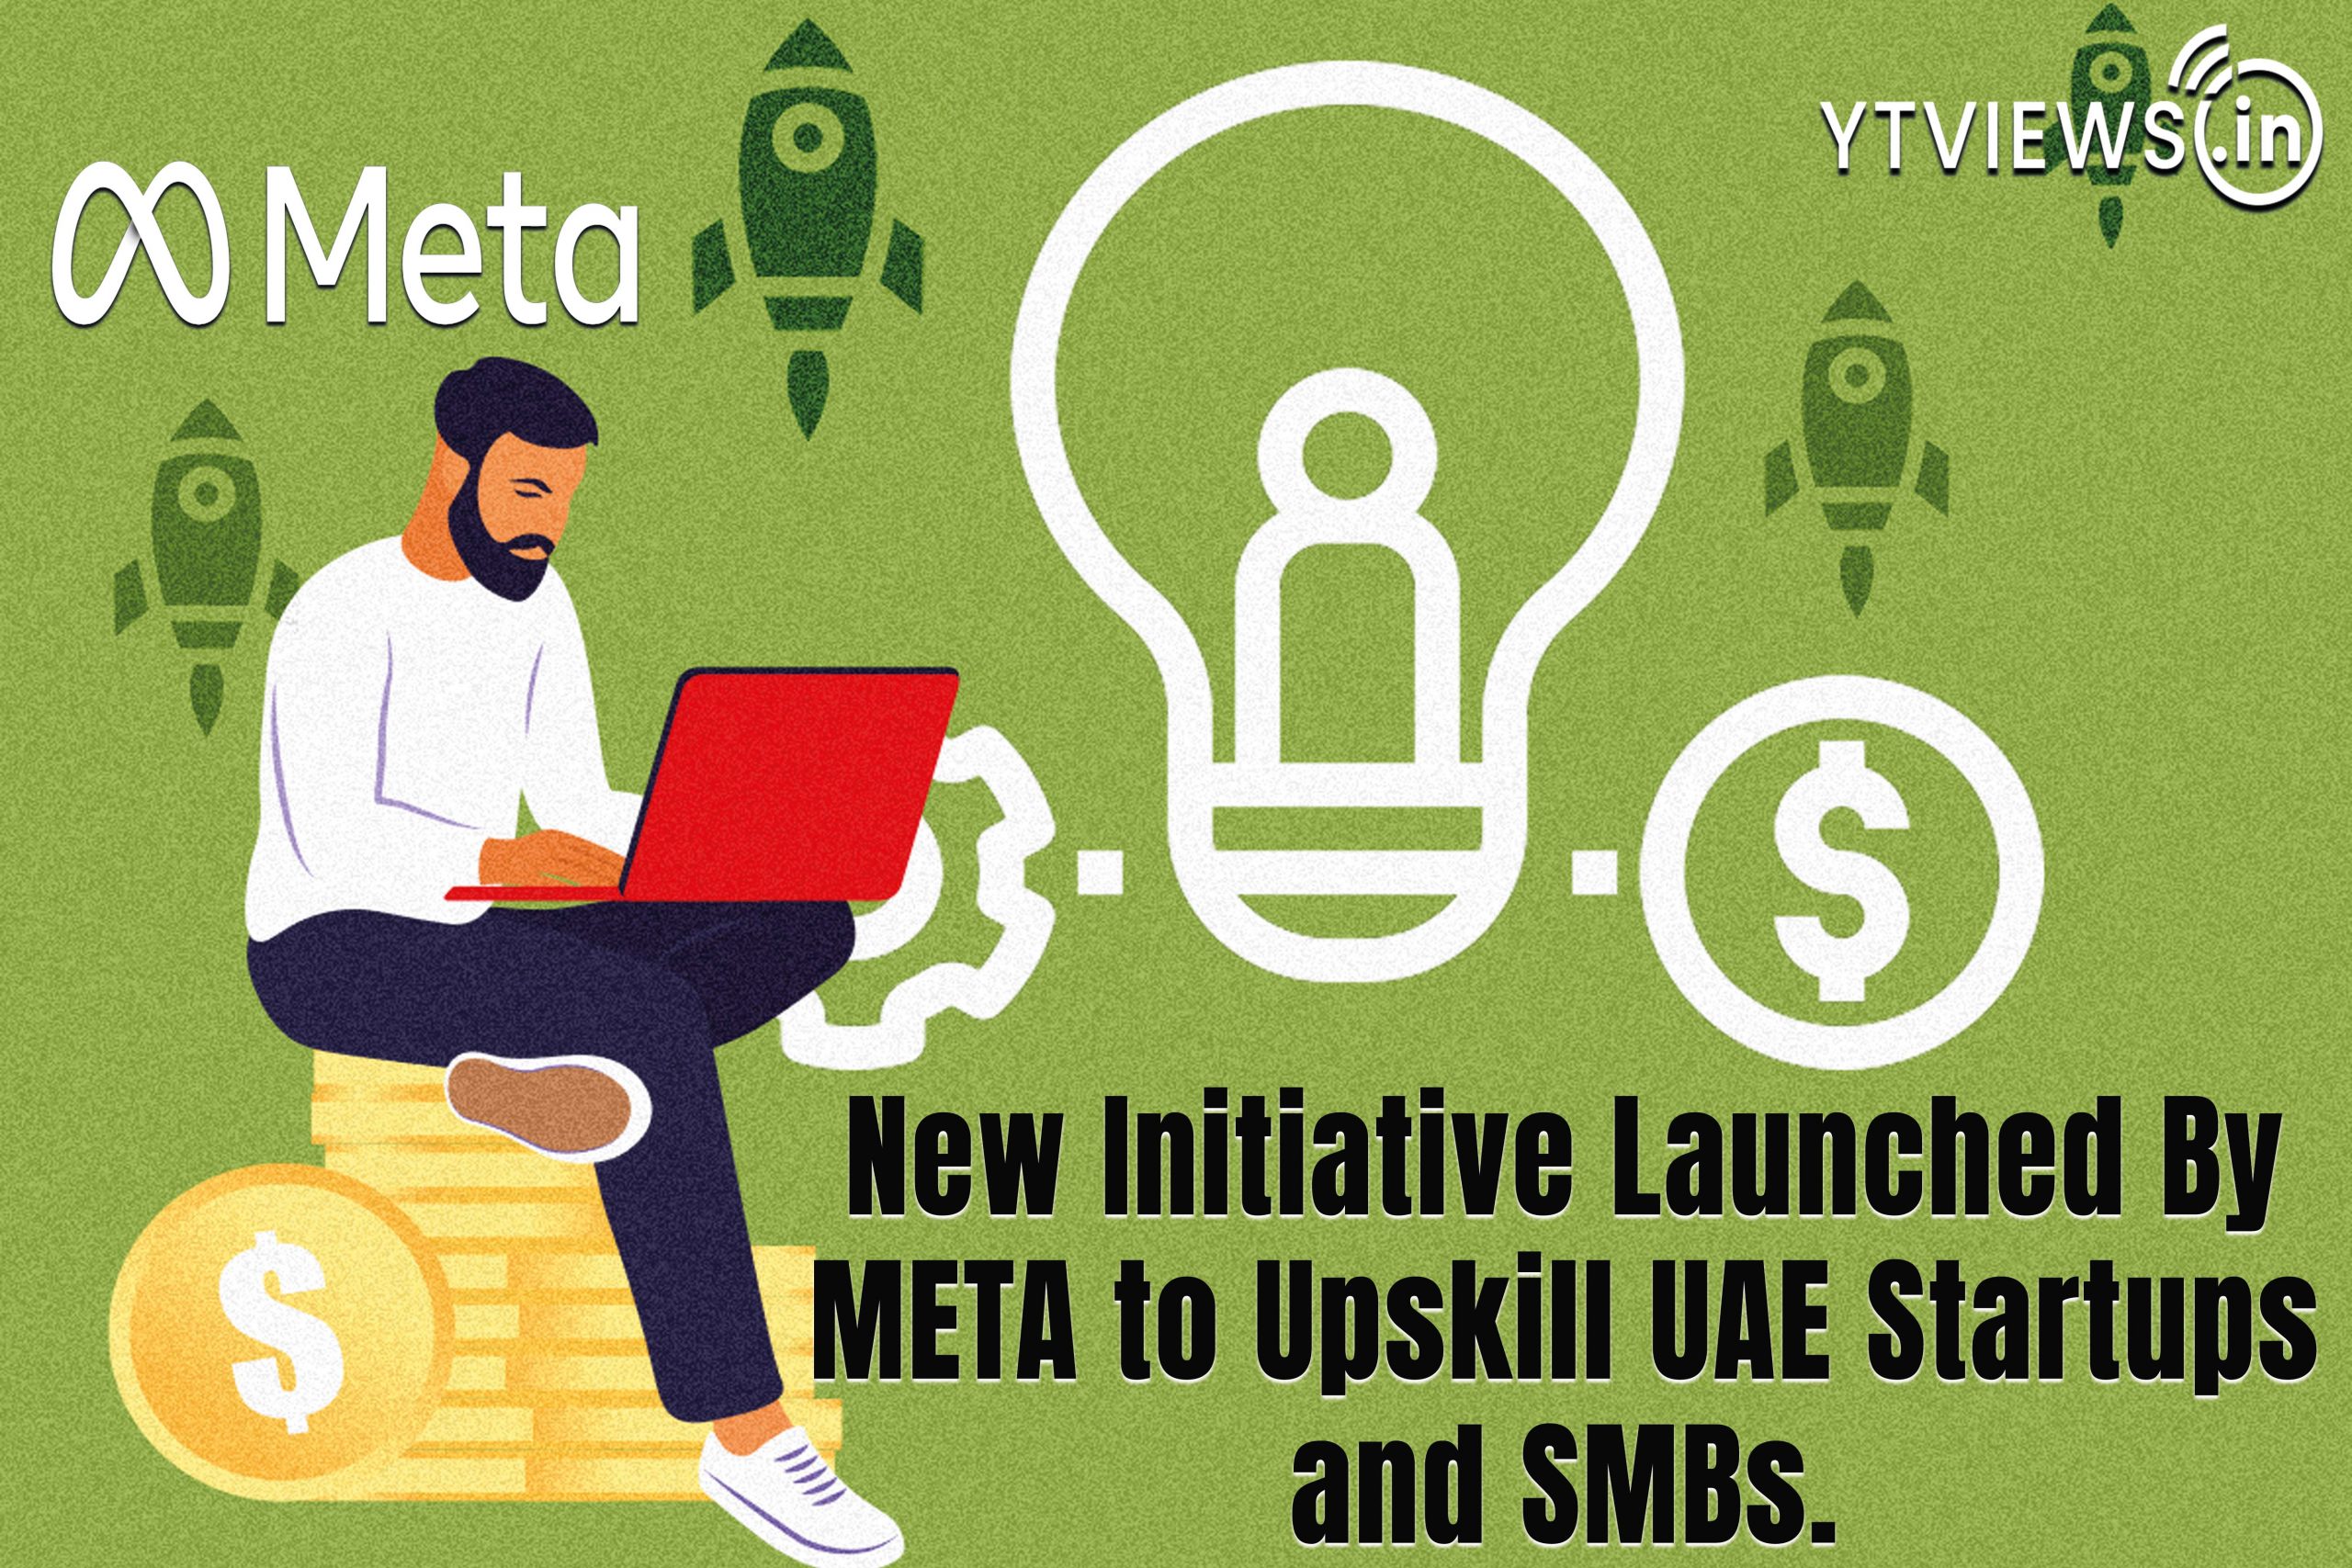 New initiative launched by Meta to upskill UAE startups and SMBs